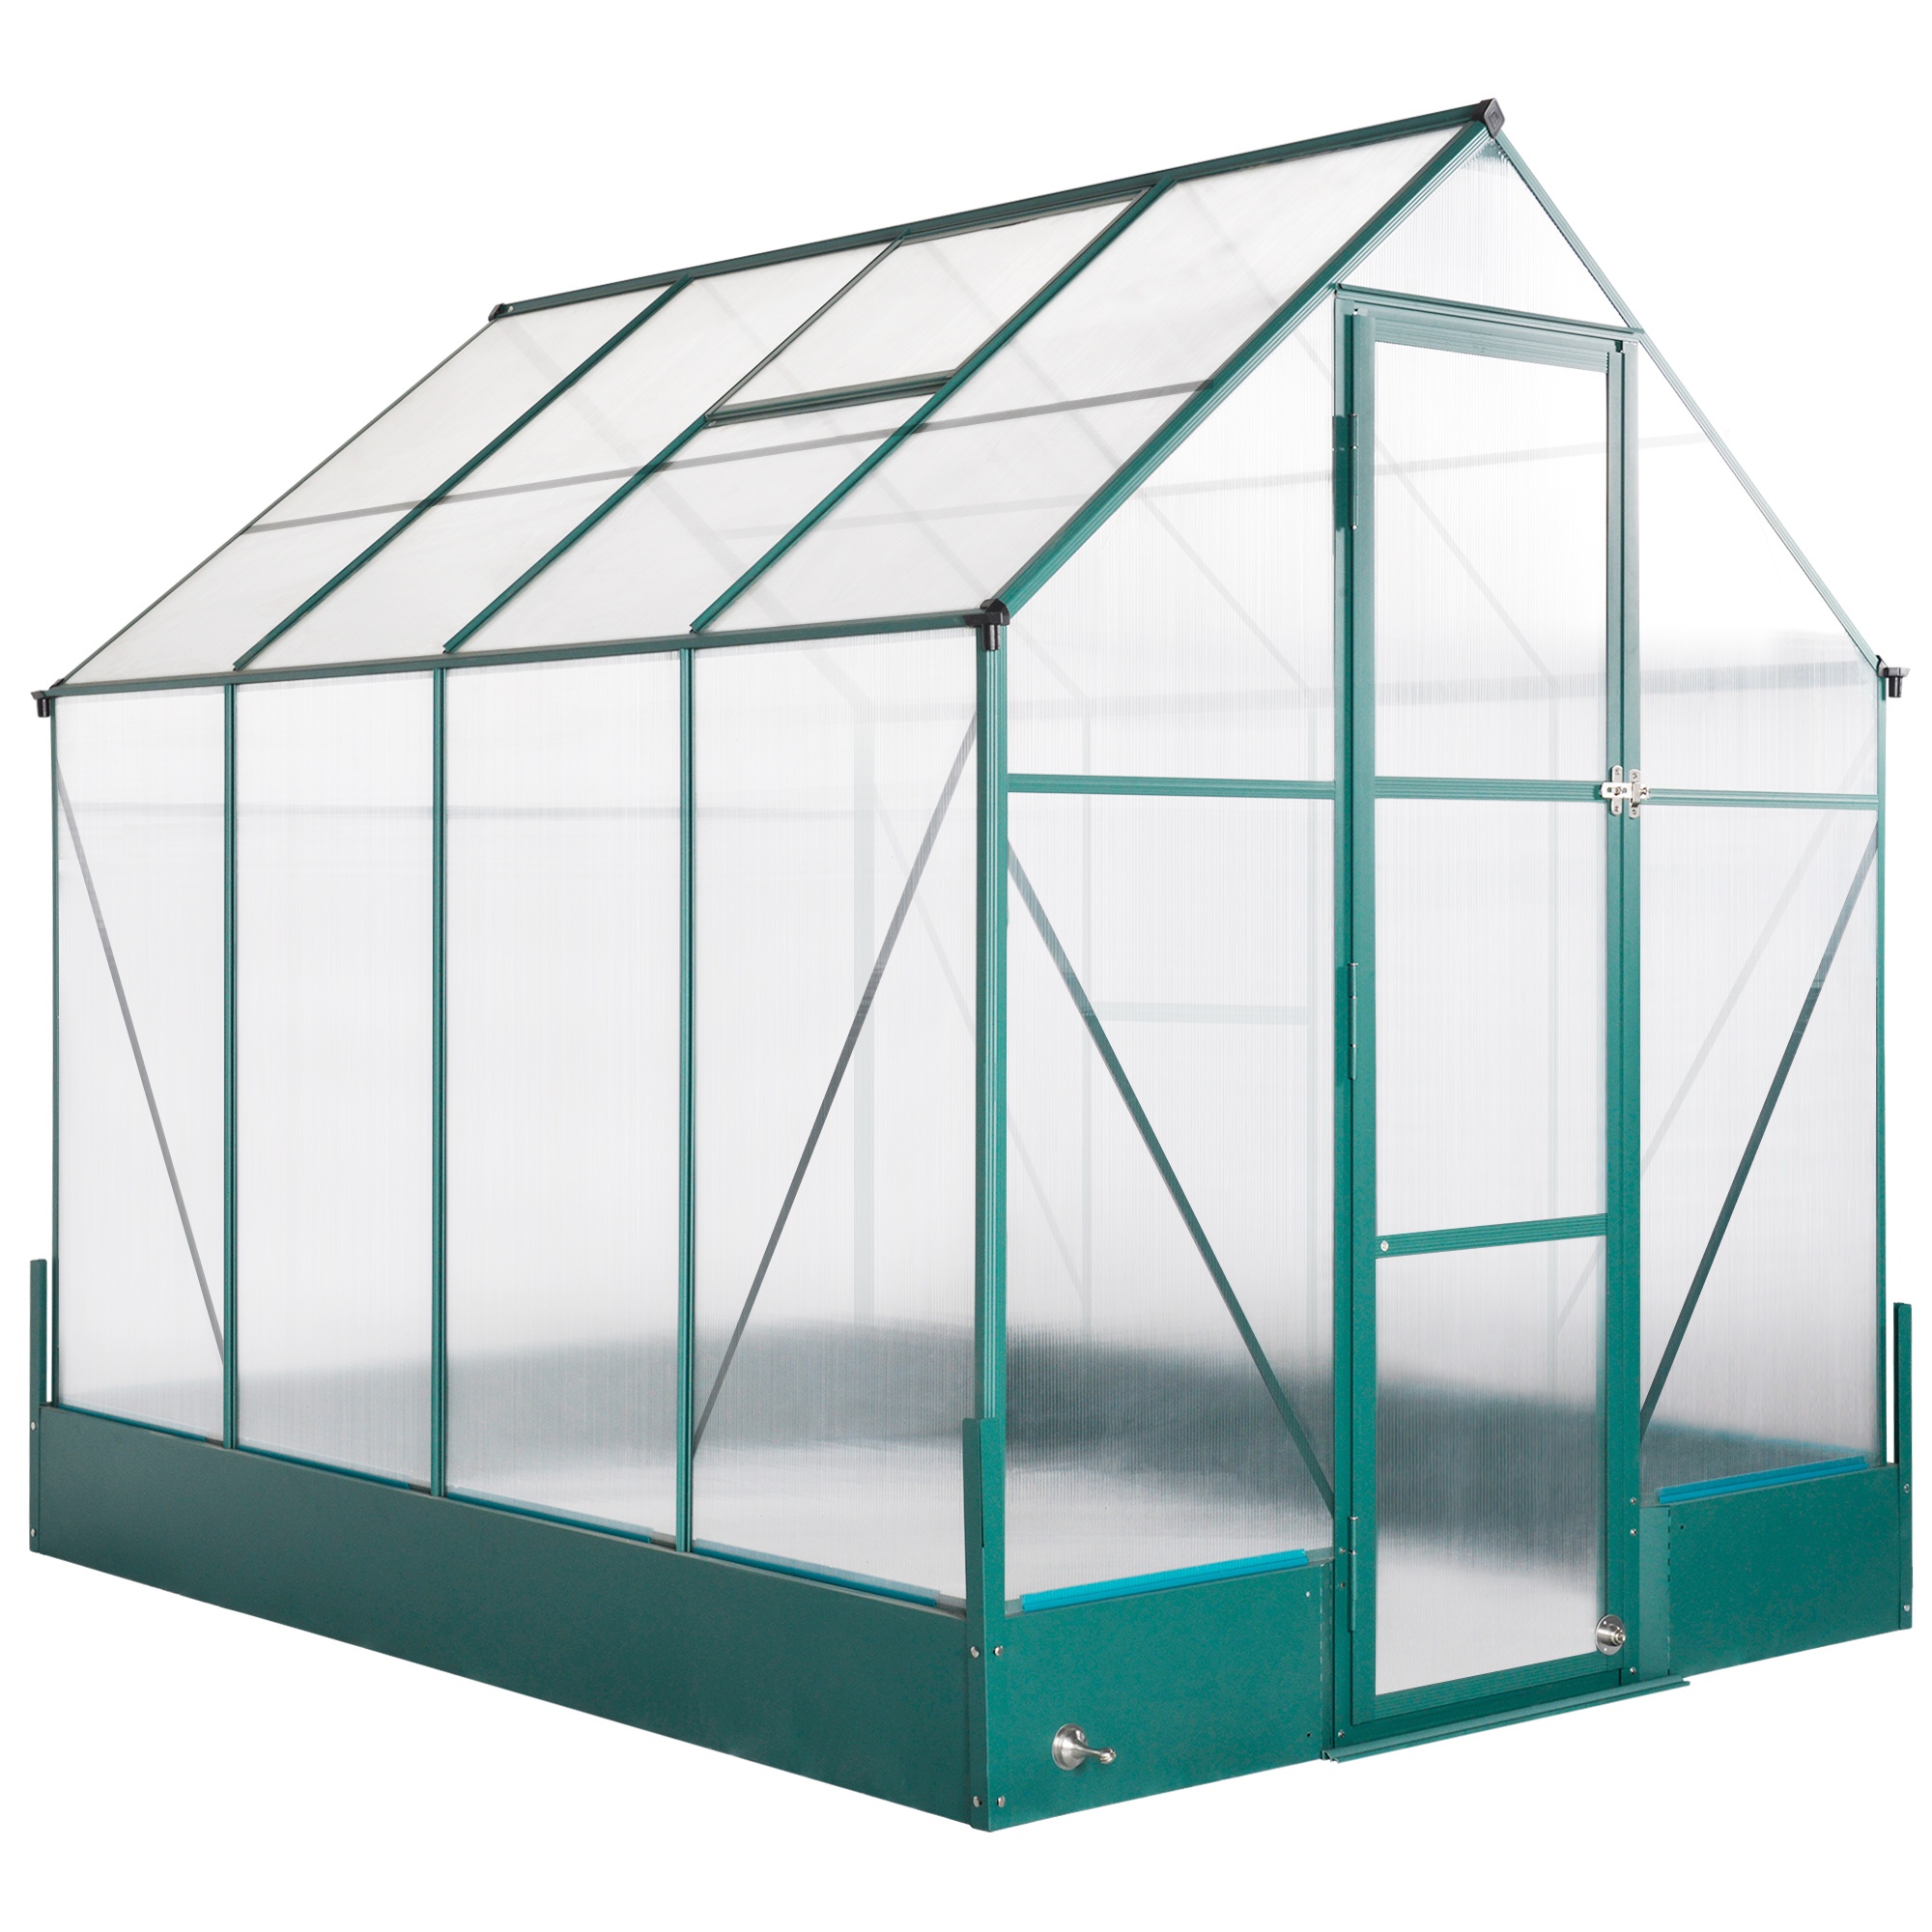 Outsunny 6' x 8' x 7' Walk-in Greenhouse, Plant Hot House with Window & Doors